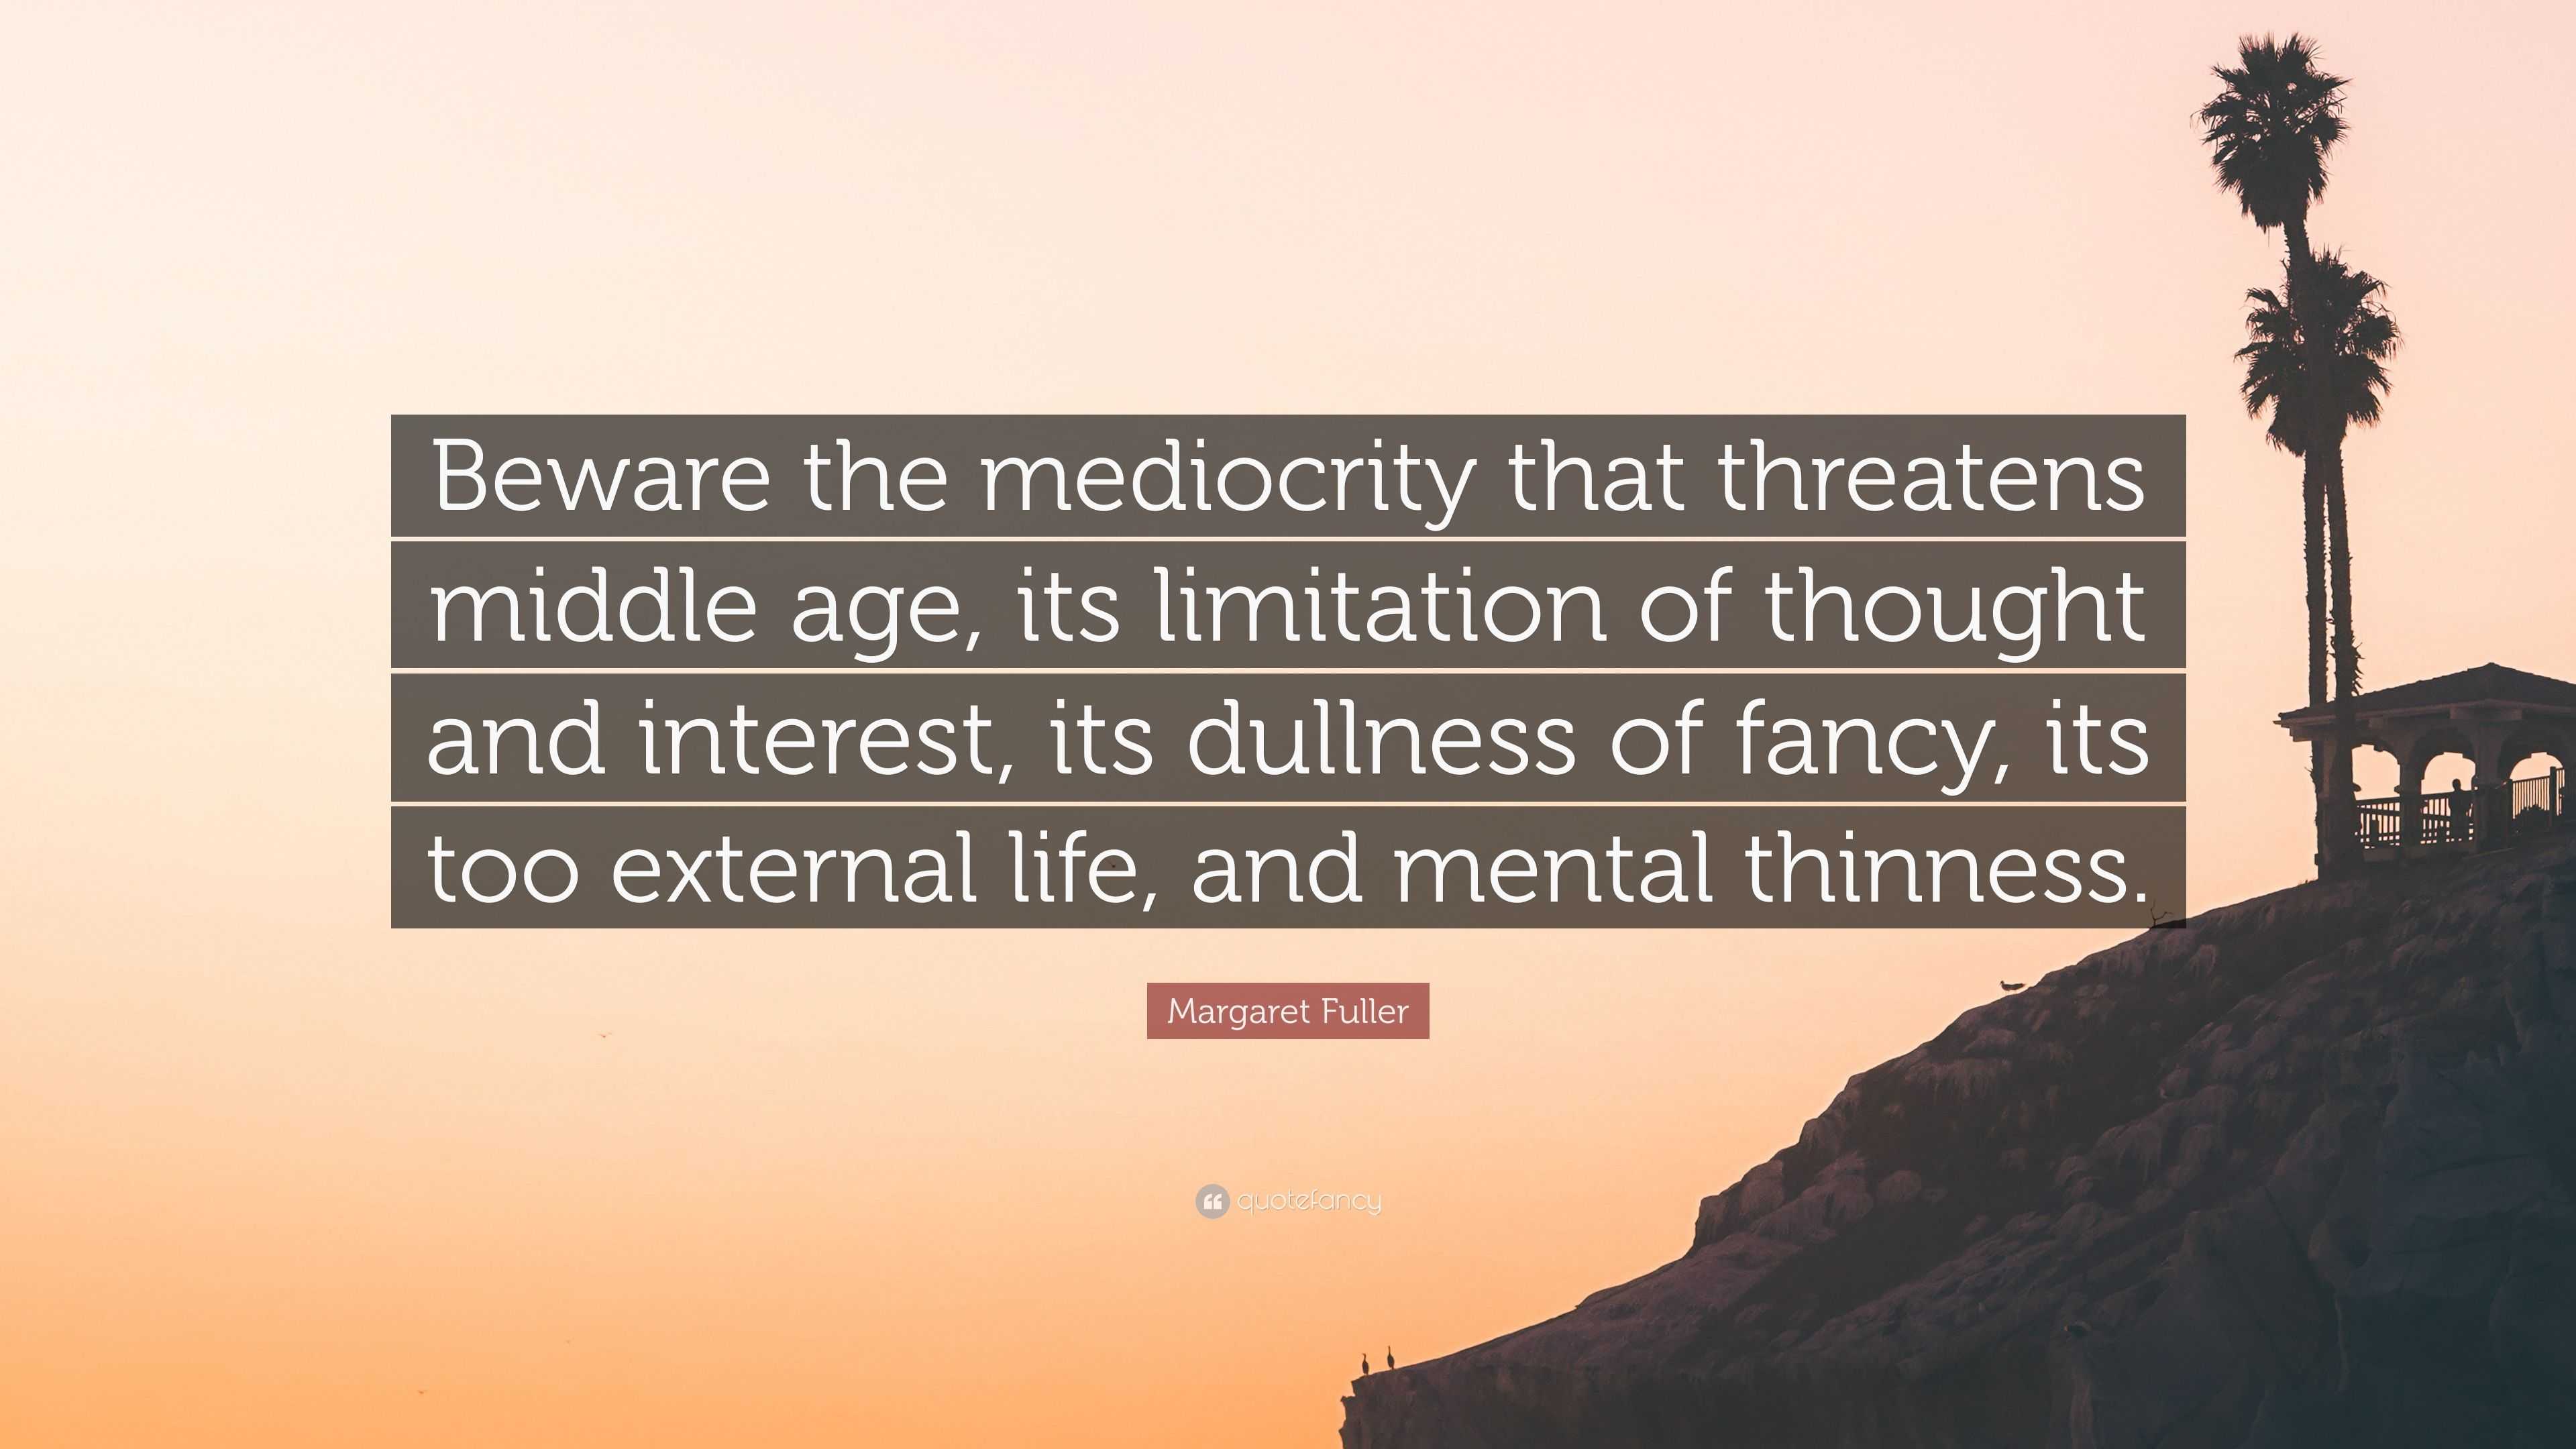 Margaret Fuller Quote: “Beware the mediocrity that threatens middle age